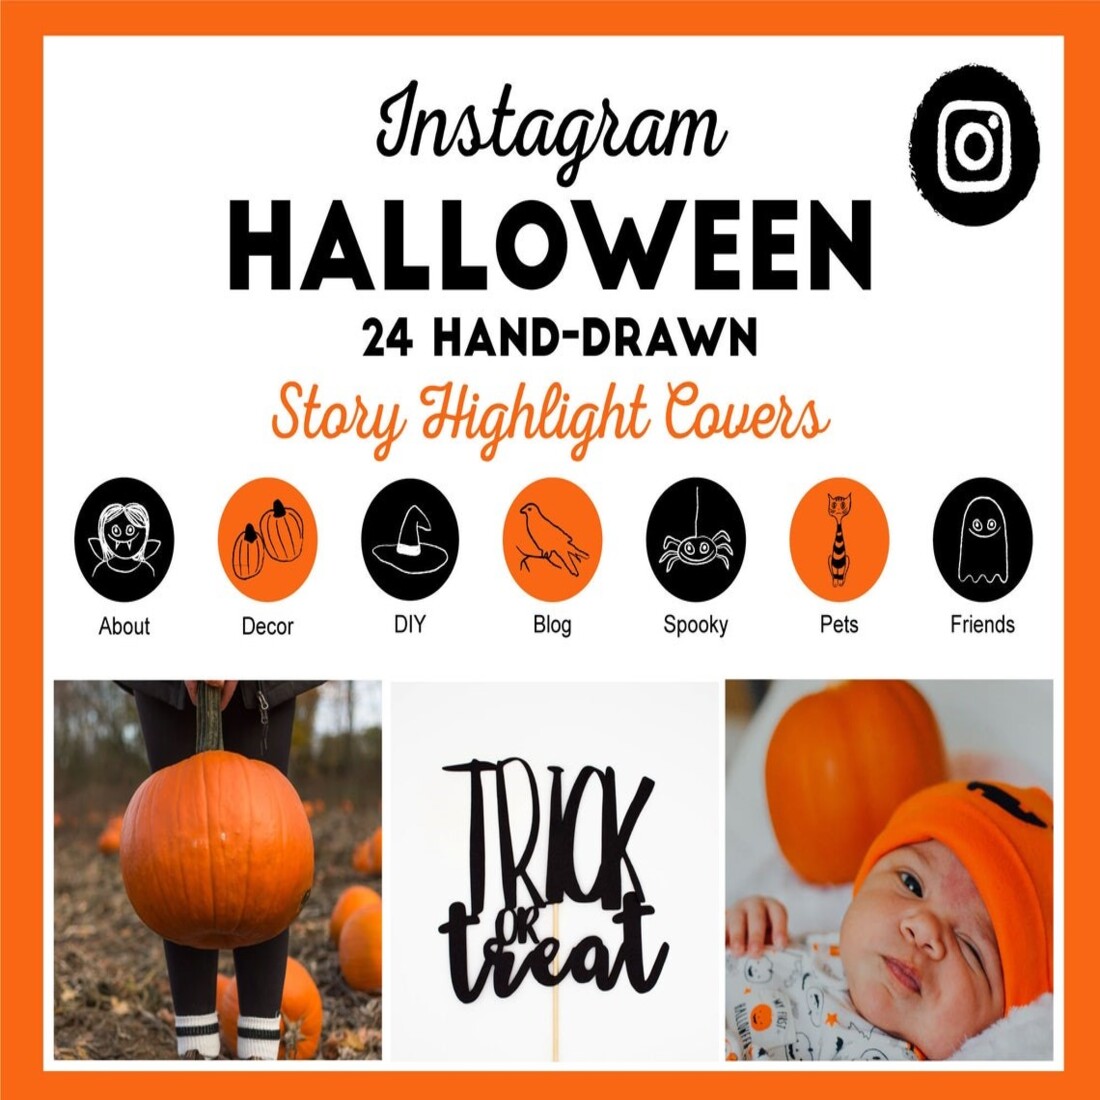 halloween preview Instagram Halloween Items (24 Hand-Drawn Story Highlight Covers)